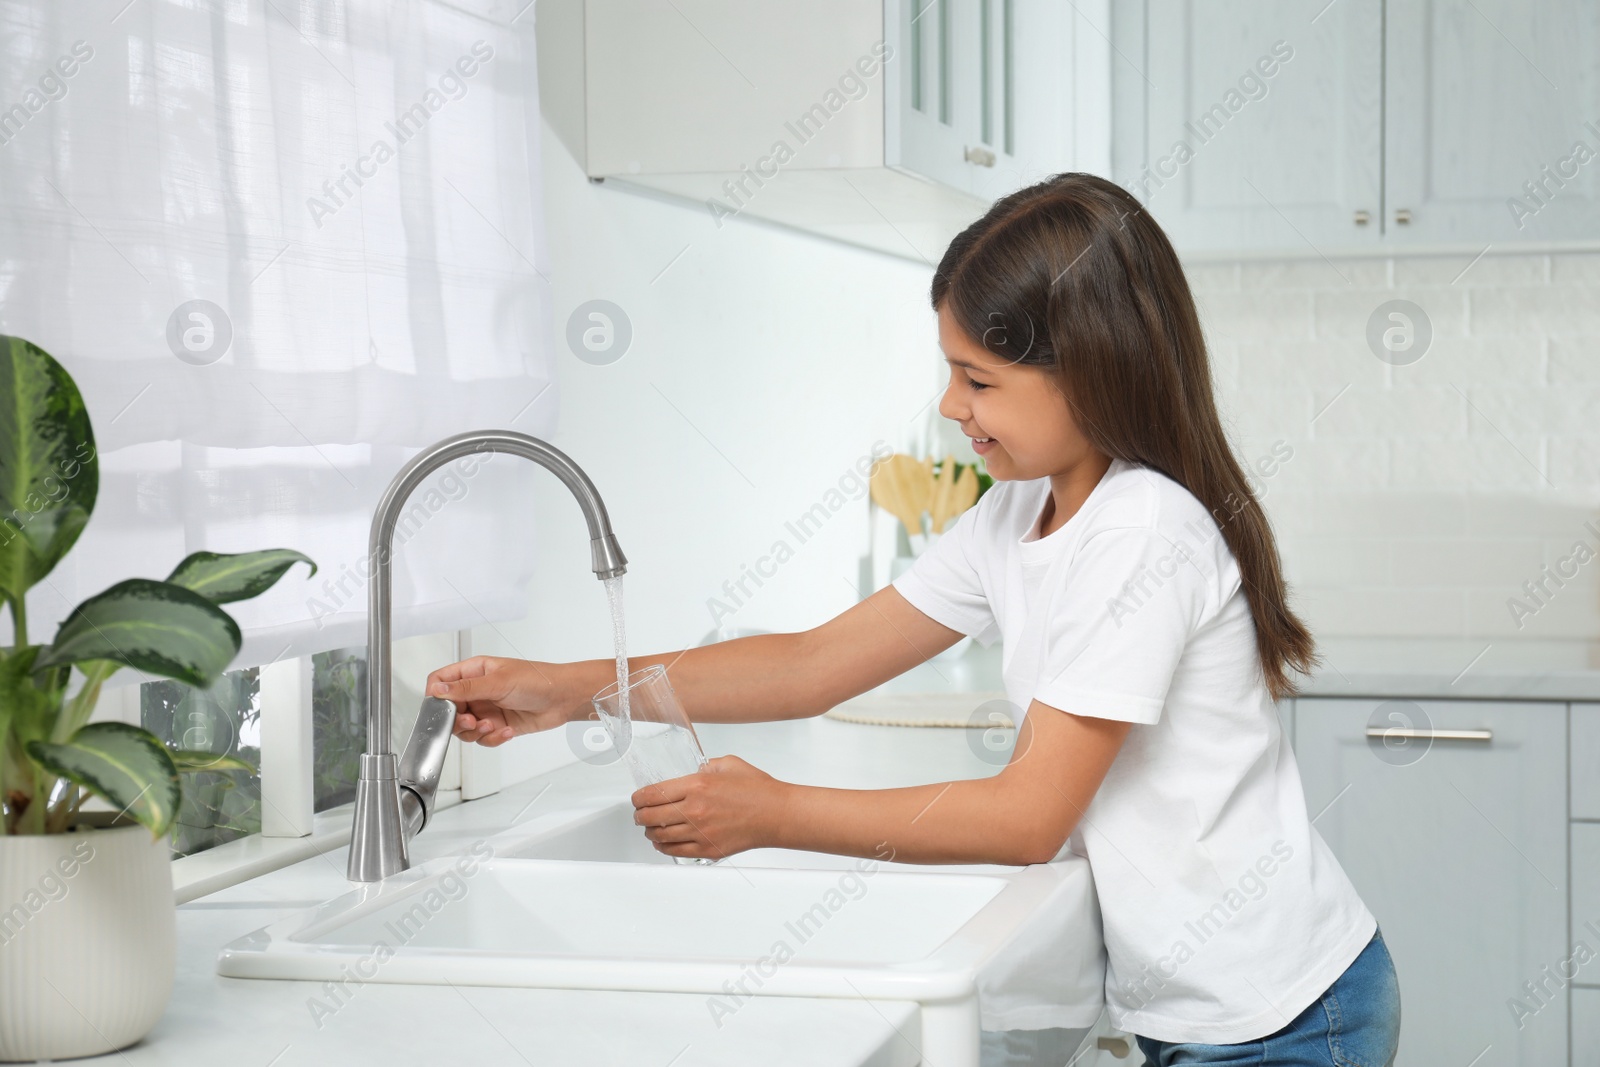 Photo of Girl filling glass with water from tap in kitchen